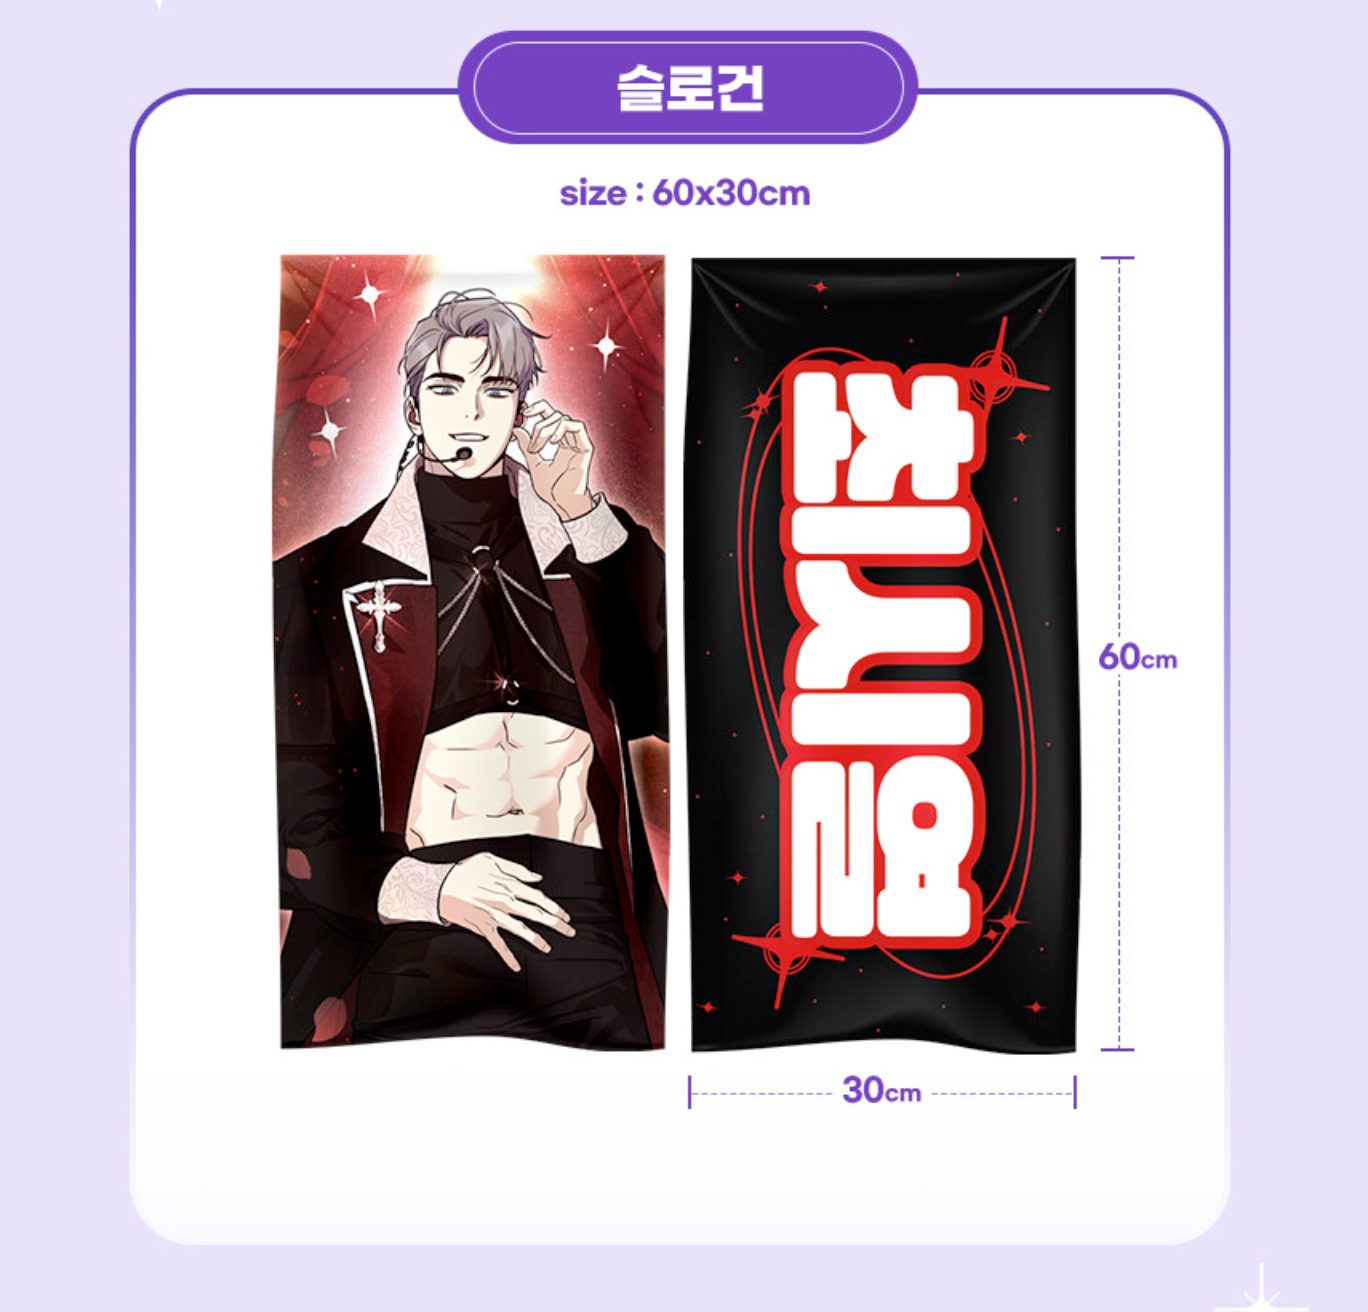 My Bias Is Showing?! : official cheering kit